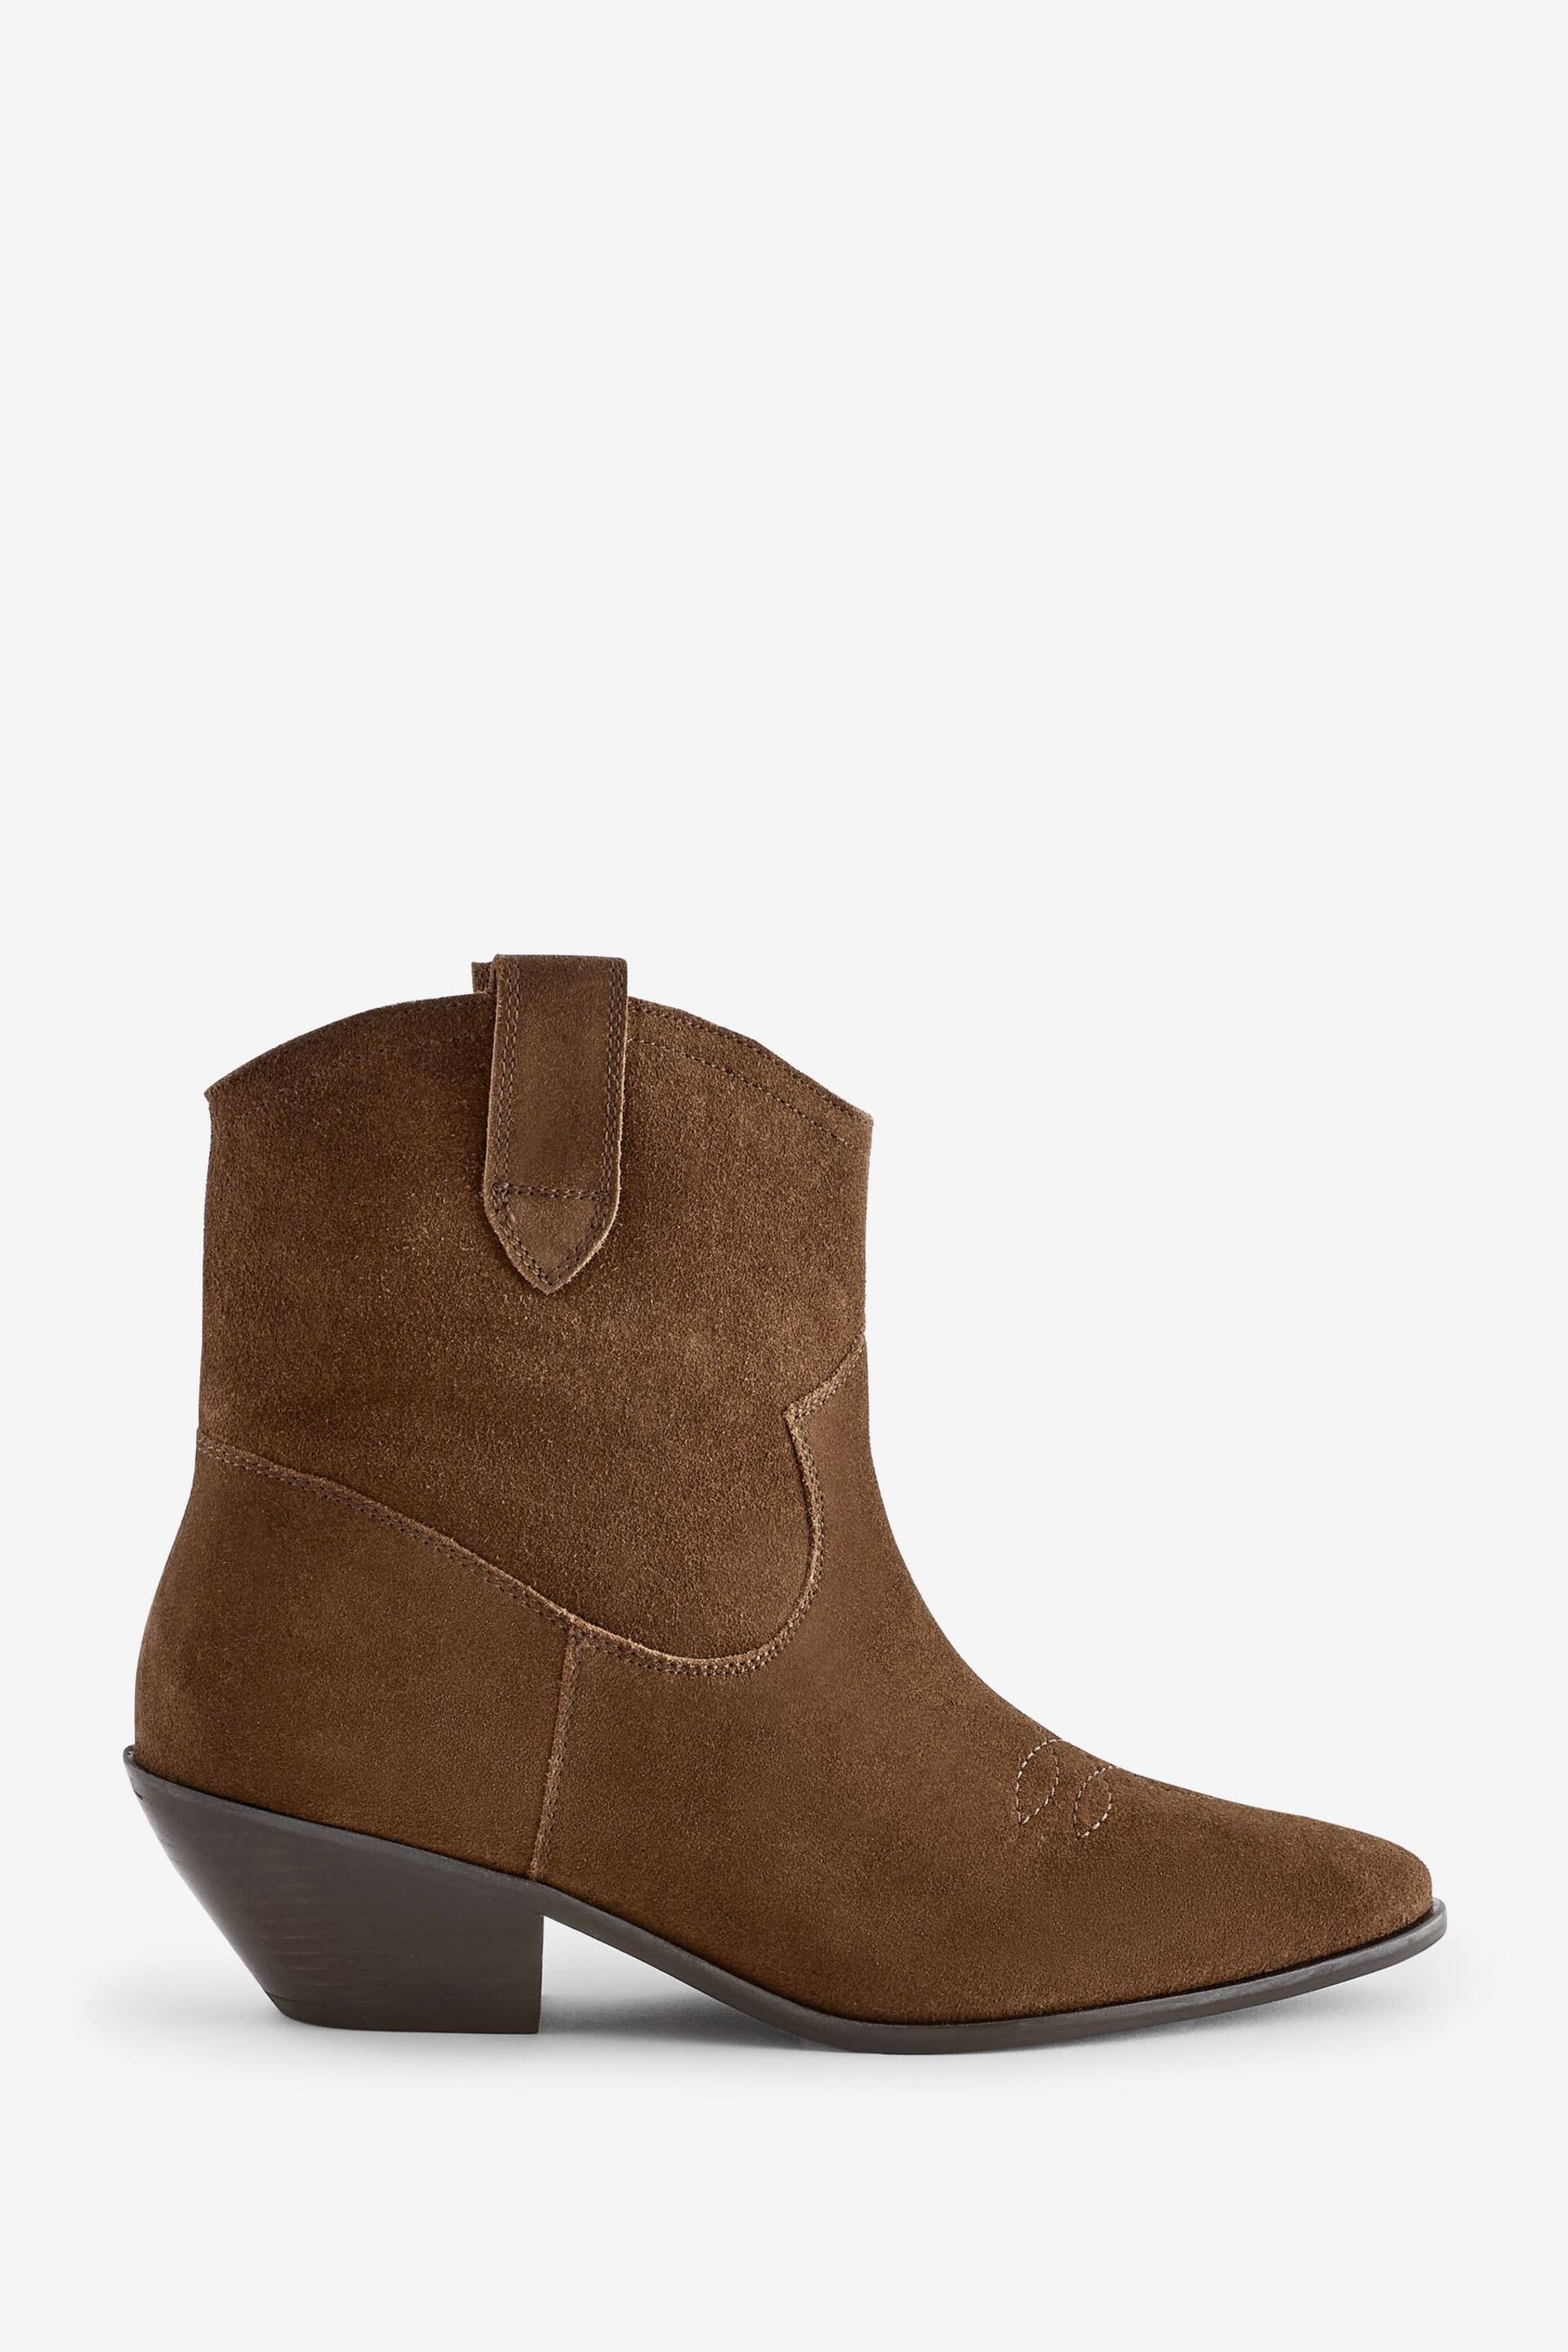 Boden Brown Western Ankle Boots - Image 1 of 5